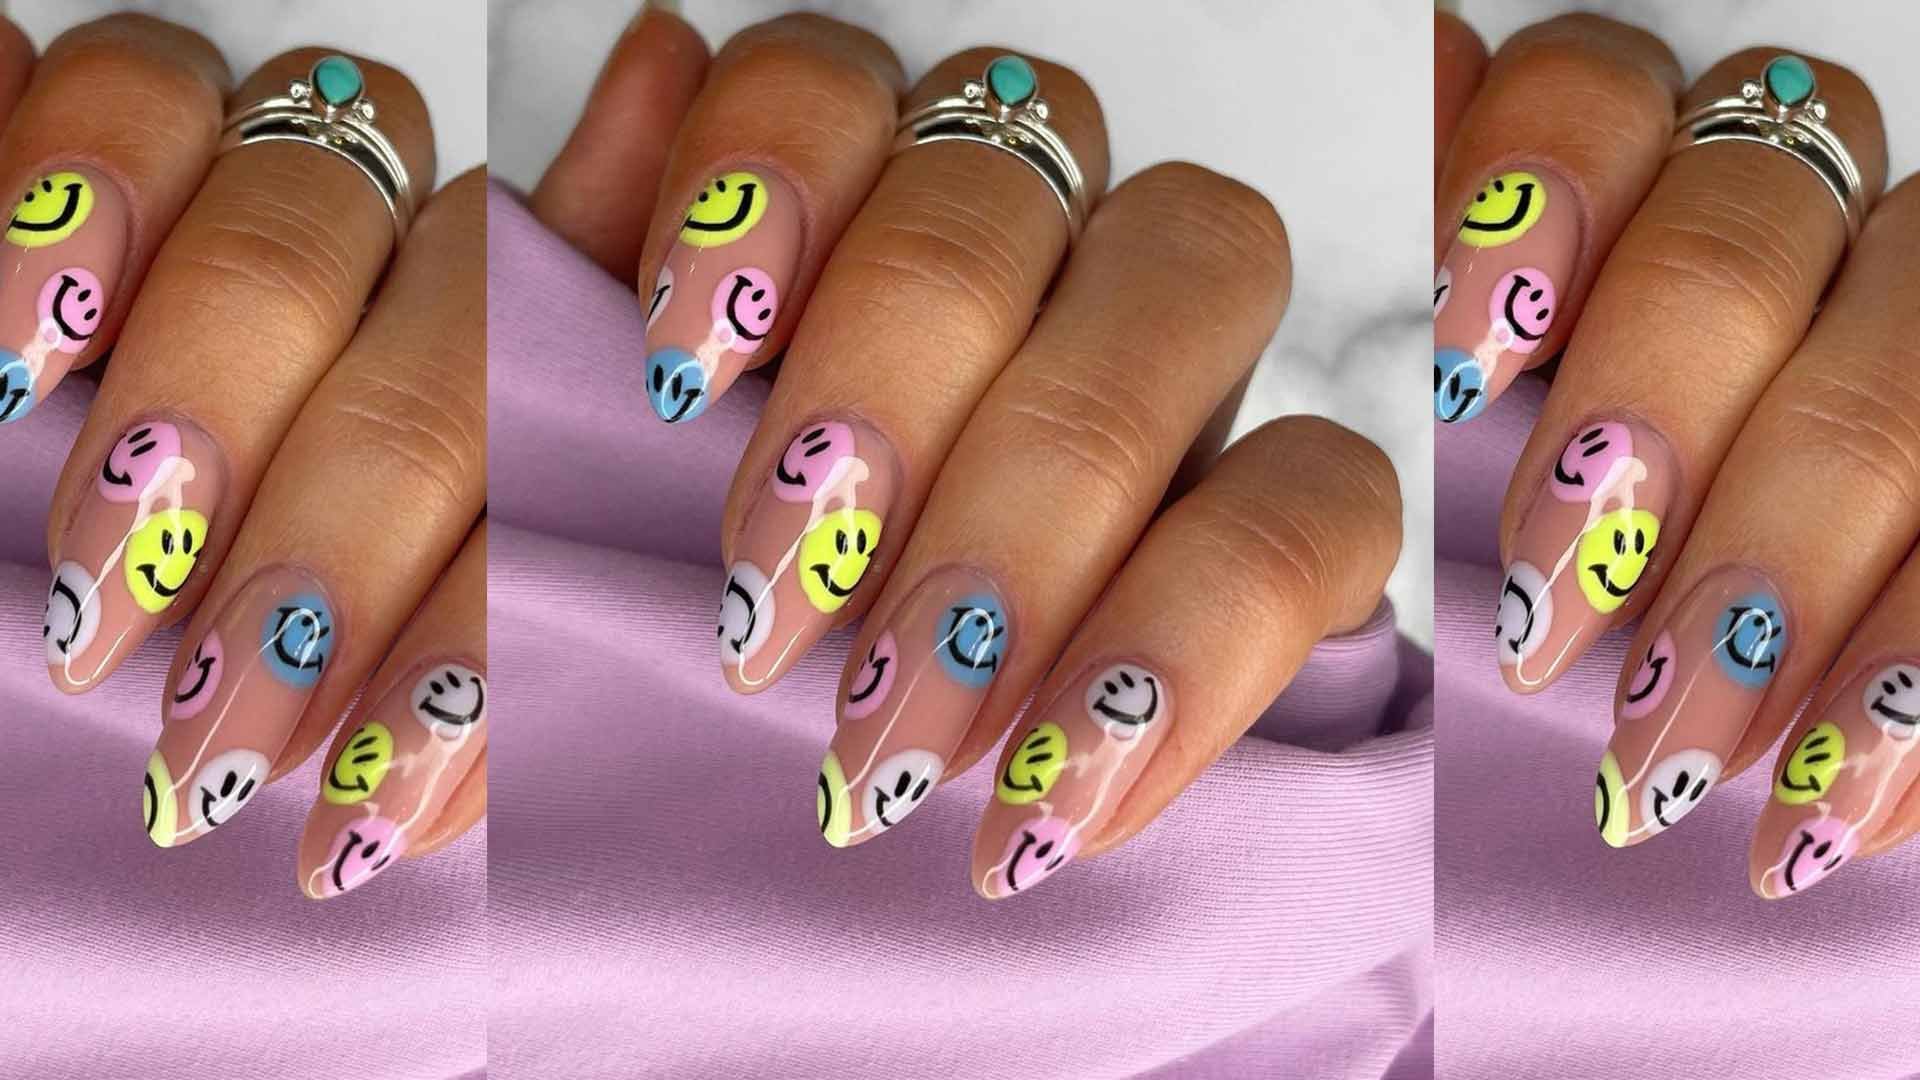 2. Easy Melted Smiley Face Nail Design - wide 4